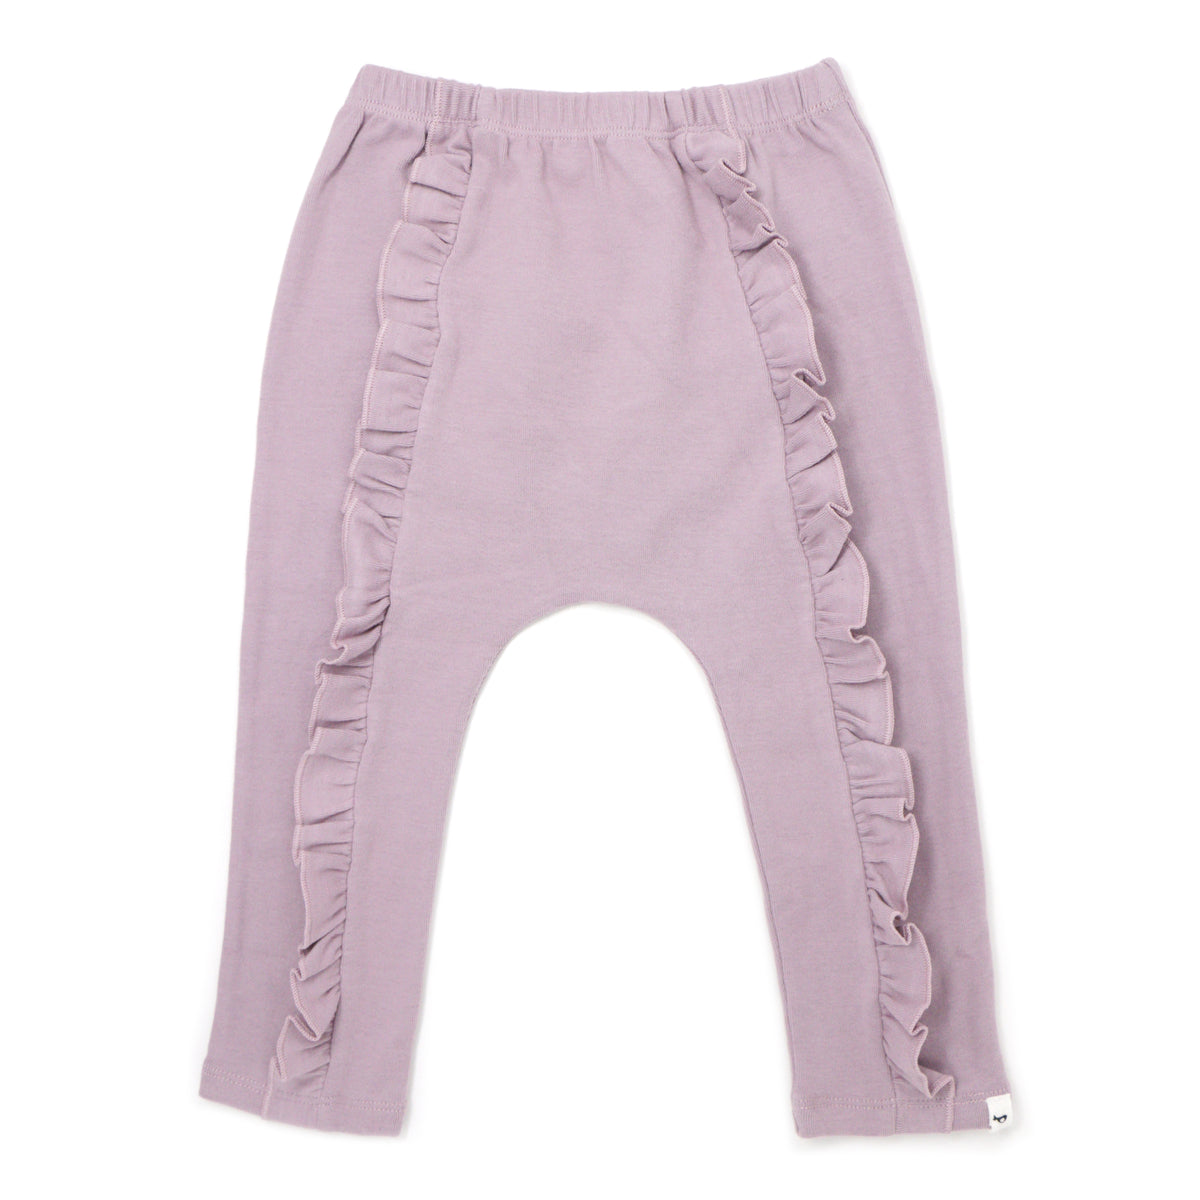 oh baby! Millie Ruffle Front Pant Baby Rib - Dusty Lavender